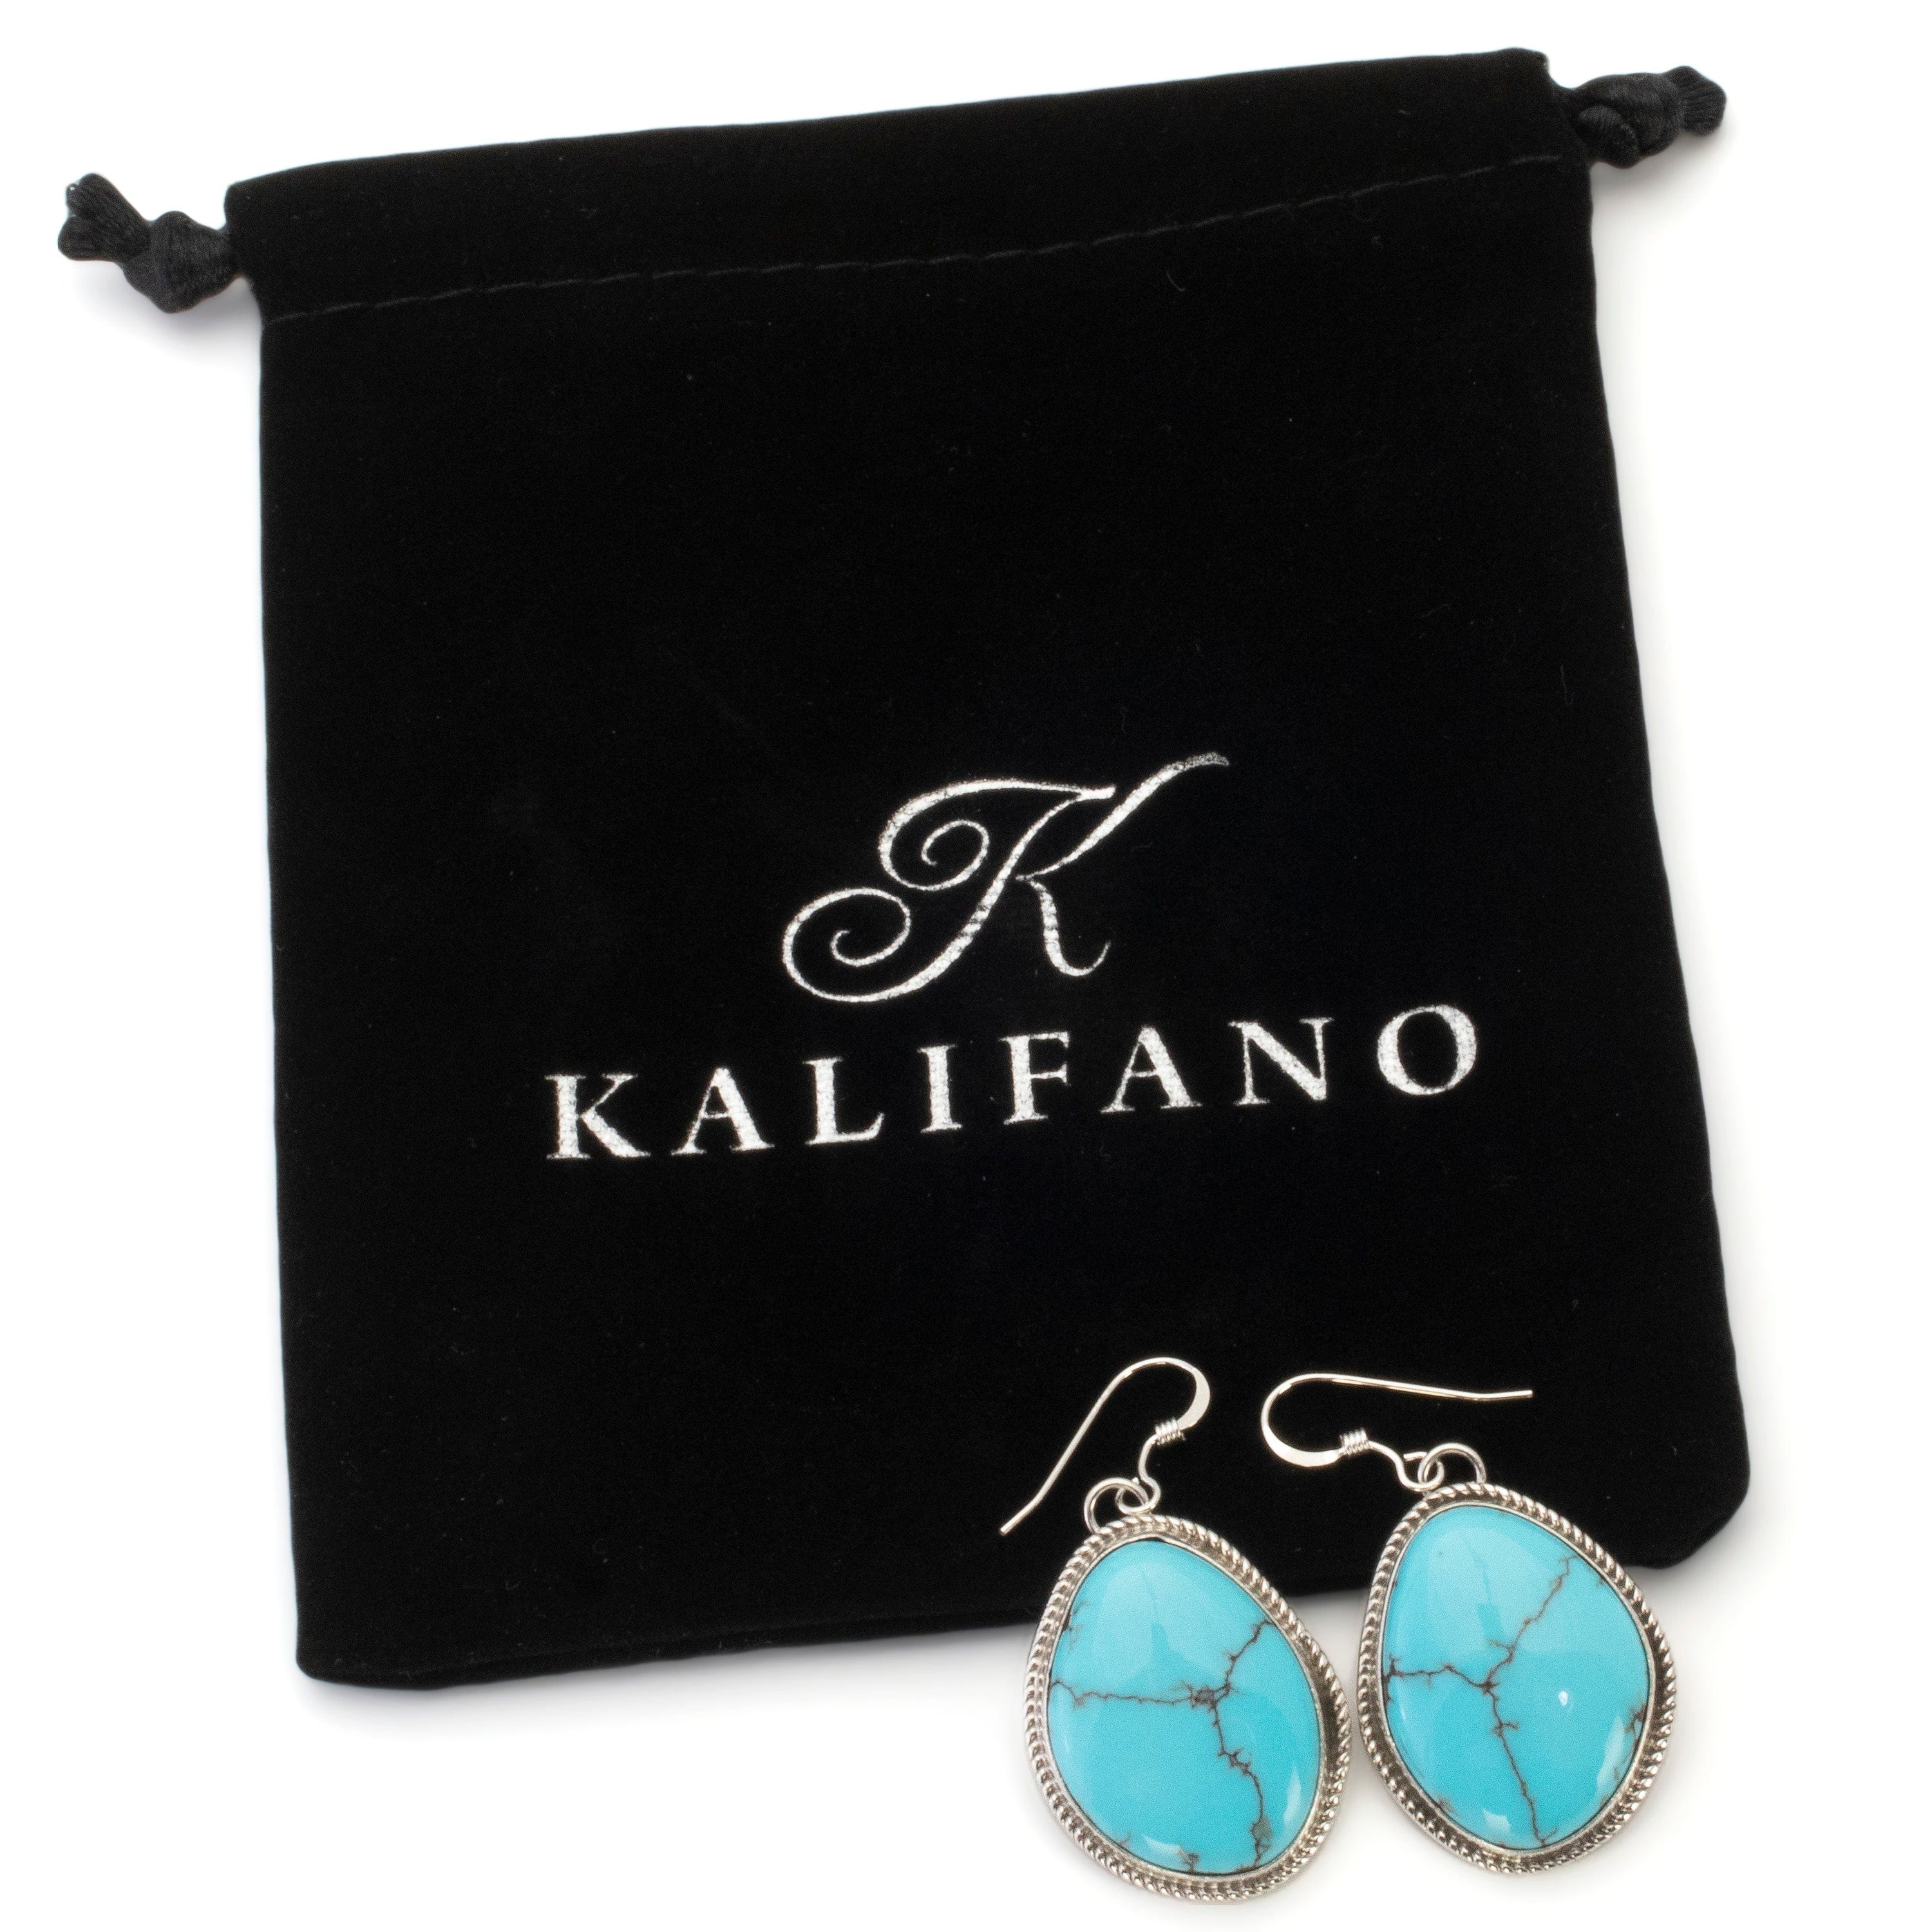 Kalifano Native American Jewelry Kingman Turquoise USA Native American Made 925 Sterling Silver Dangly Earrings with French Hook NAE600.015